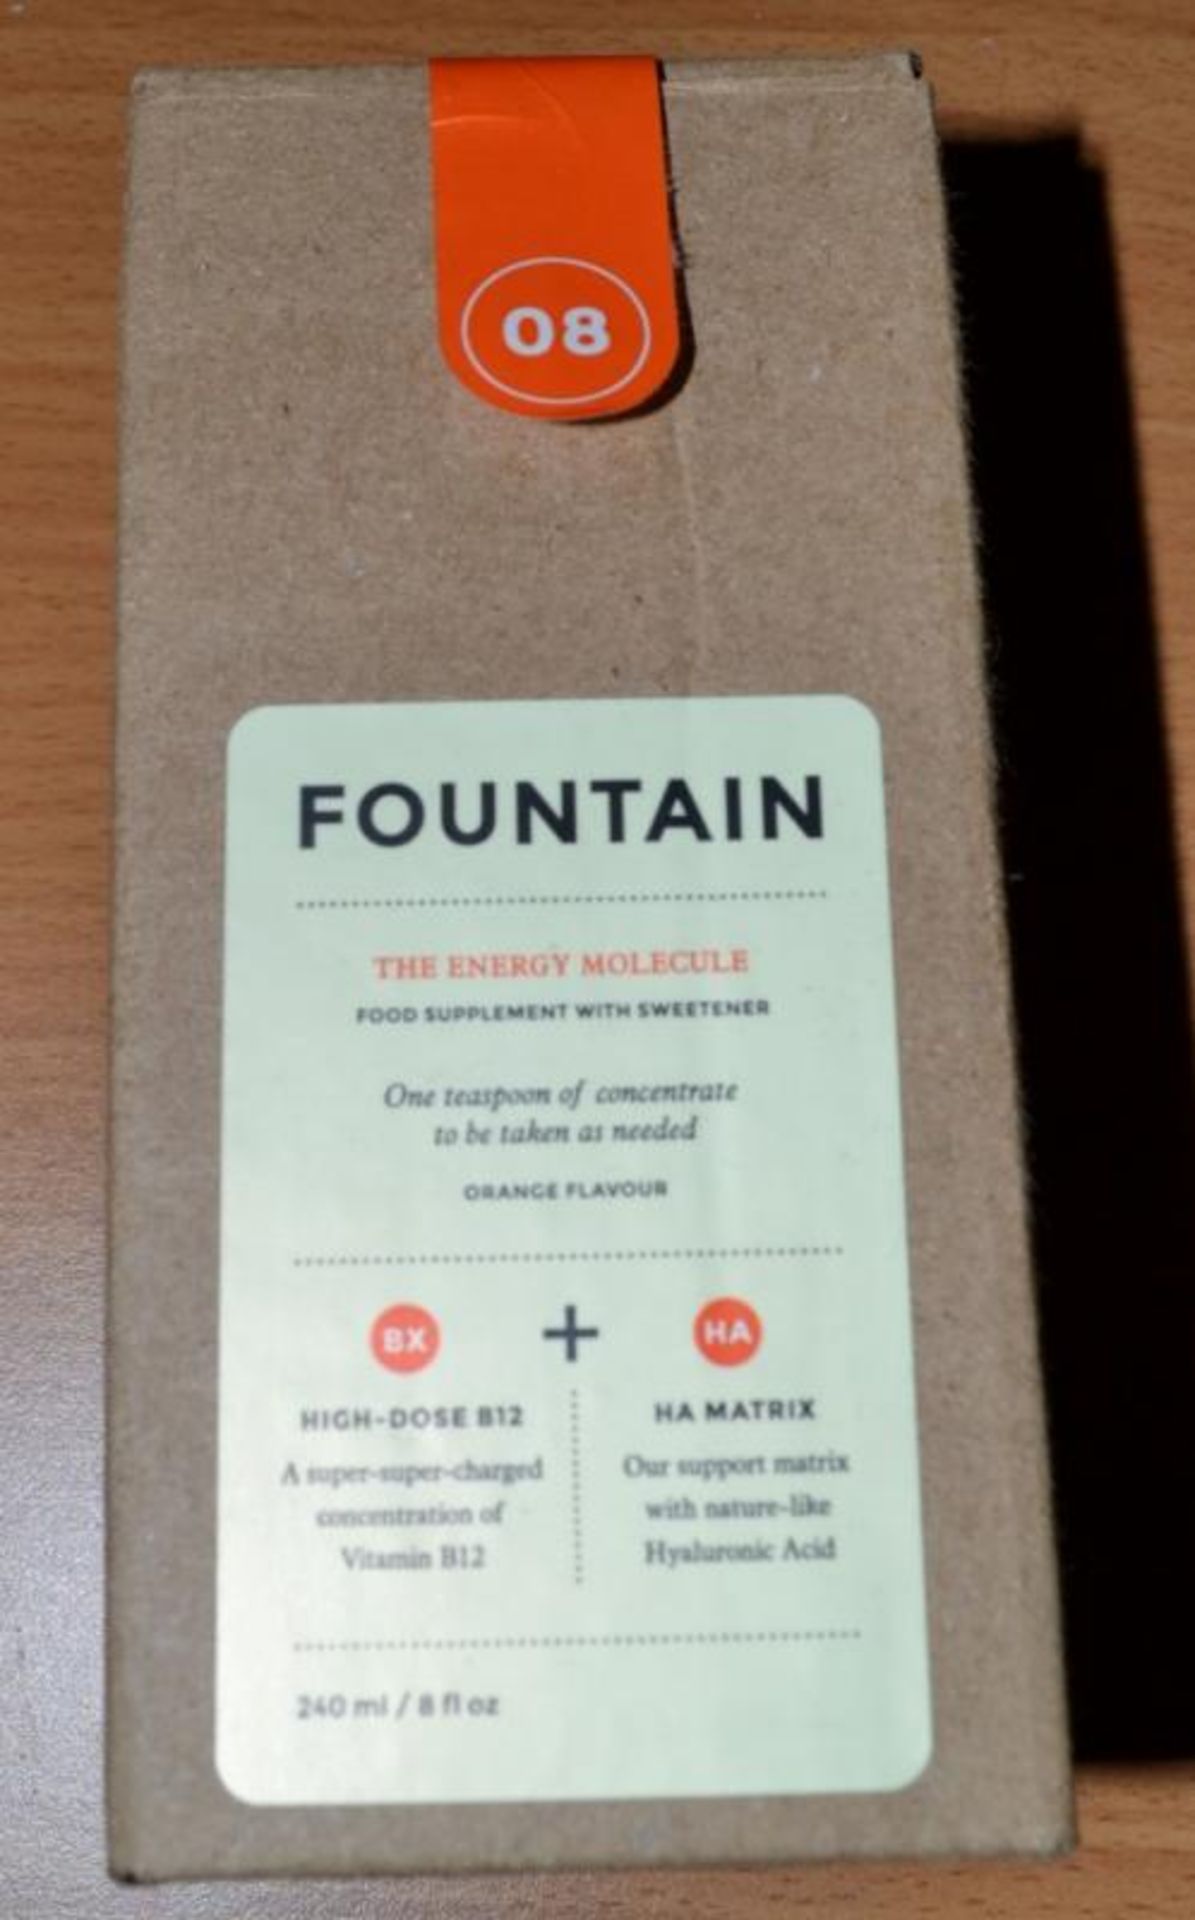 10 x 240ml Bottles of Fountain, The Energy Molecule Supplement - New & Boxed - CL185 - Ref: - Image 3 of 7